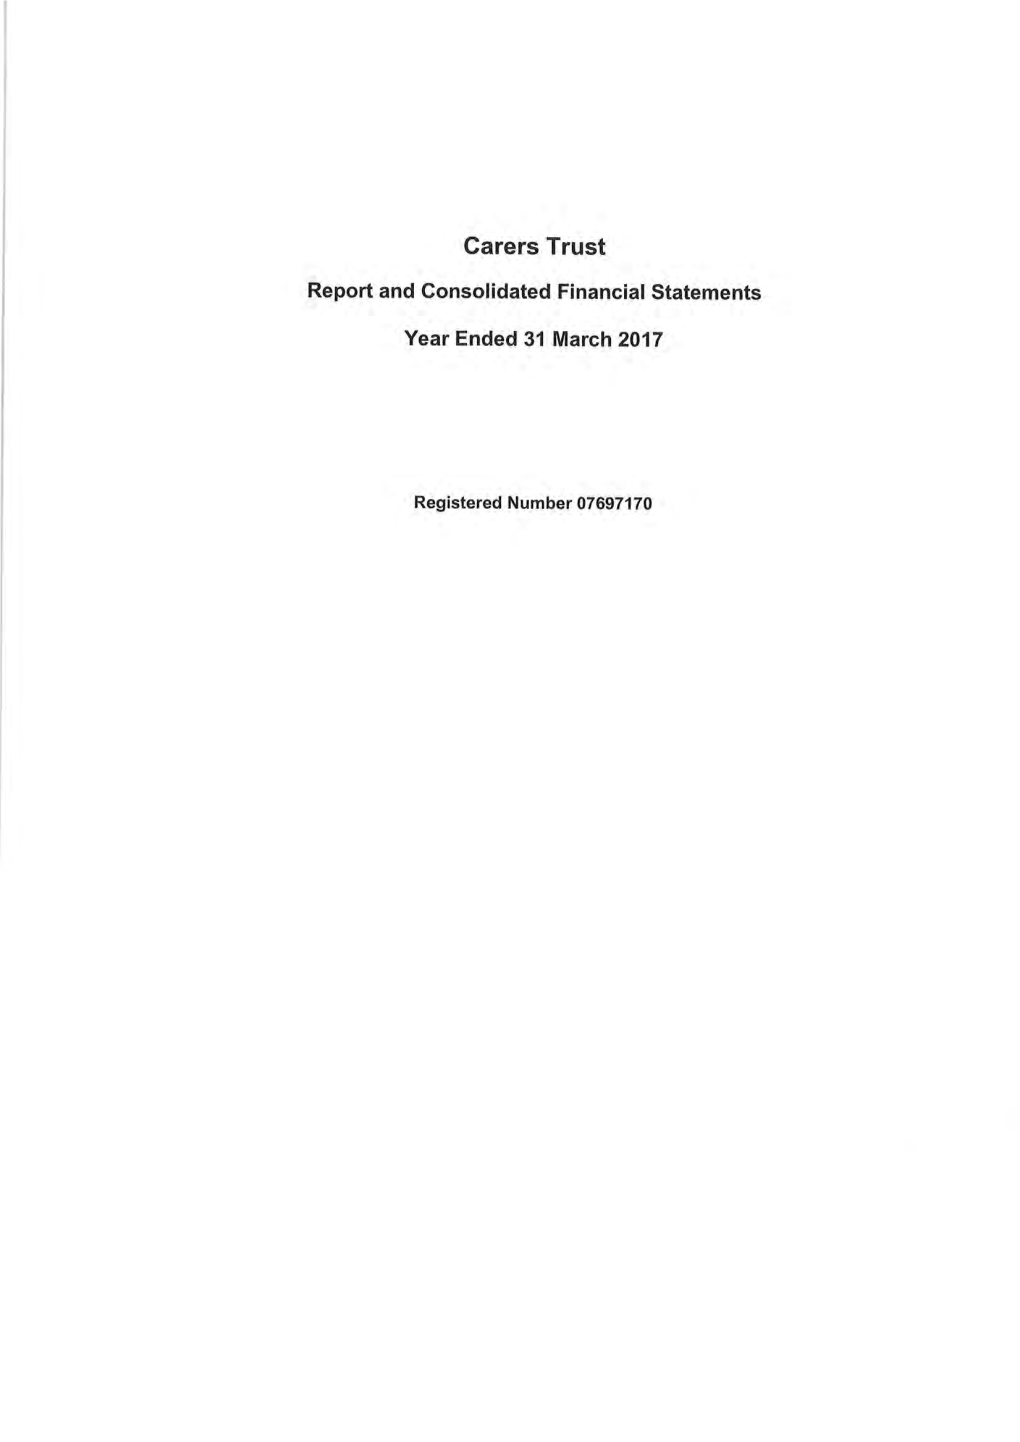 Carers Trust Report and Financial Statements Year Ended 31 March